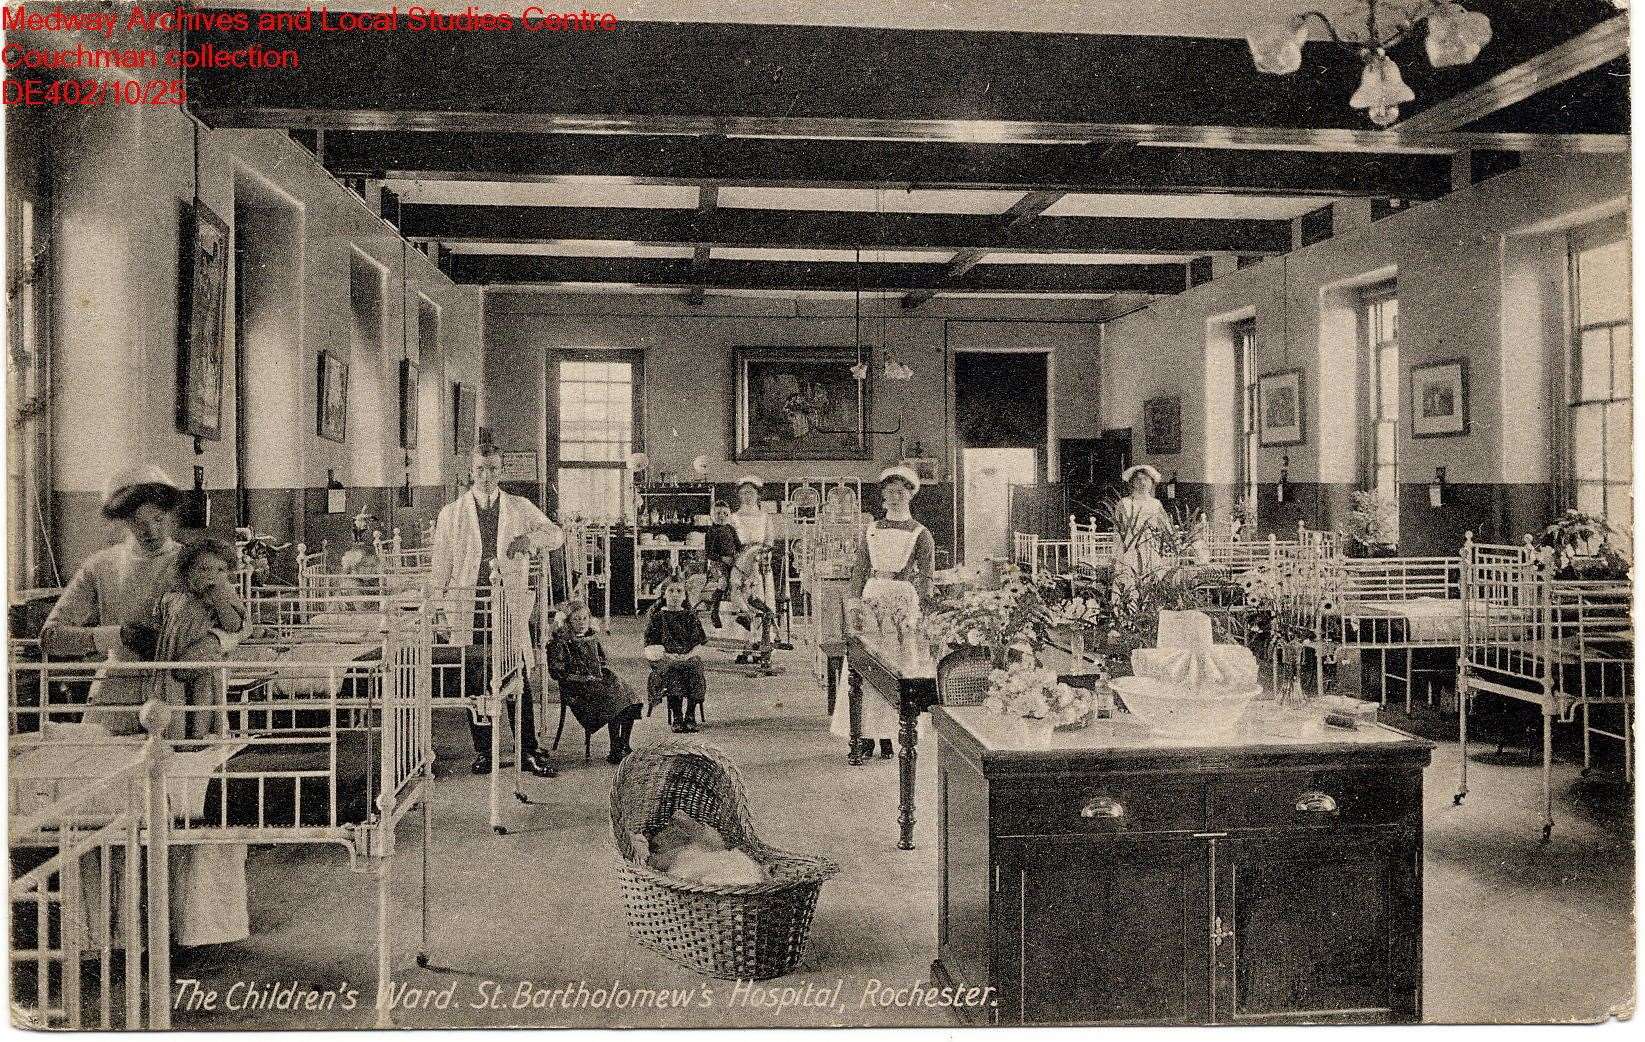 The children's ward at St Bartholomew's Hospital, Rochester. Picture: Medway Archives and Local Studies Centre Couchman Collection/from the collection of Robert Flood